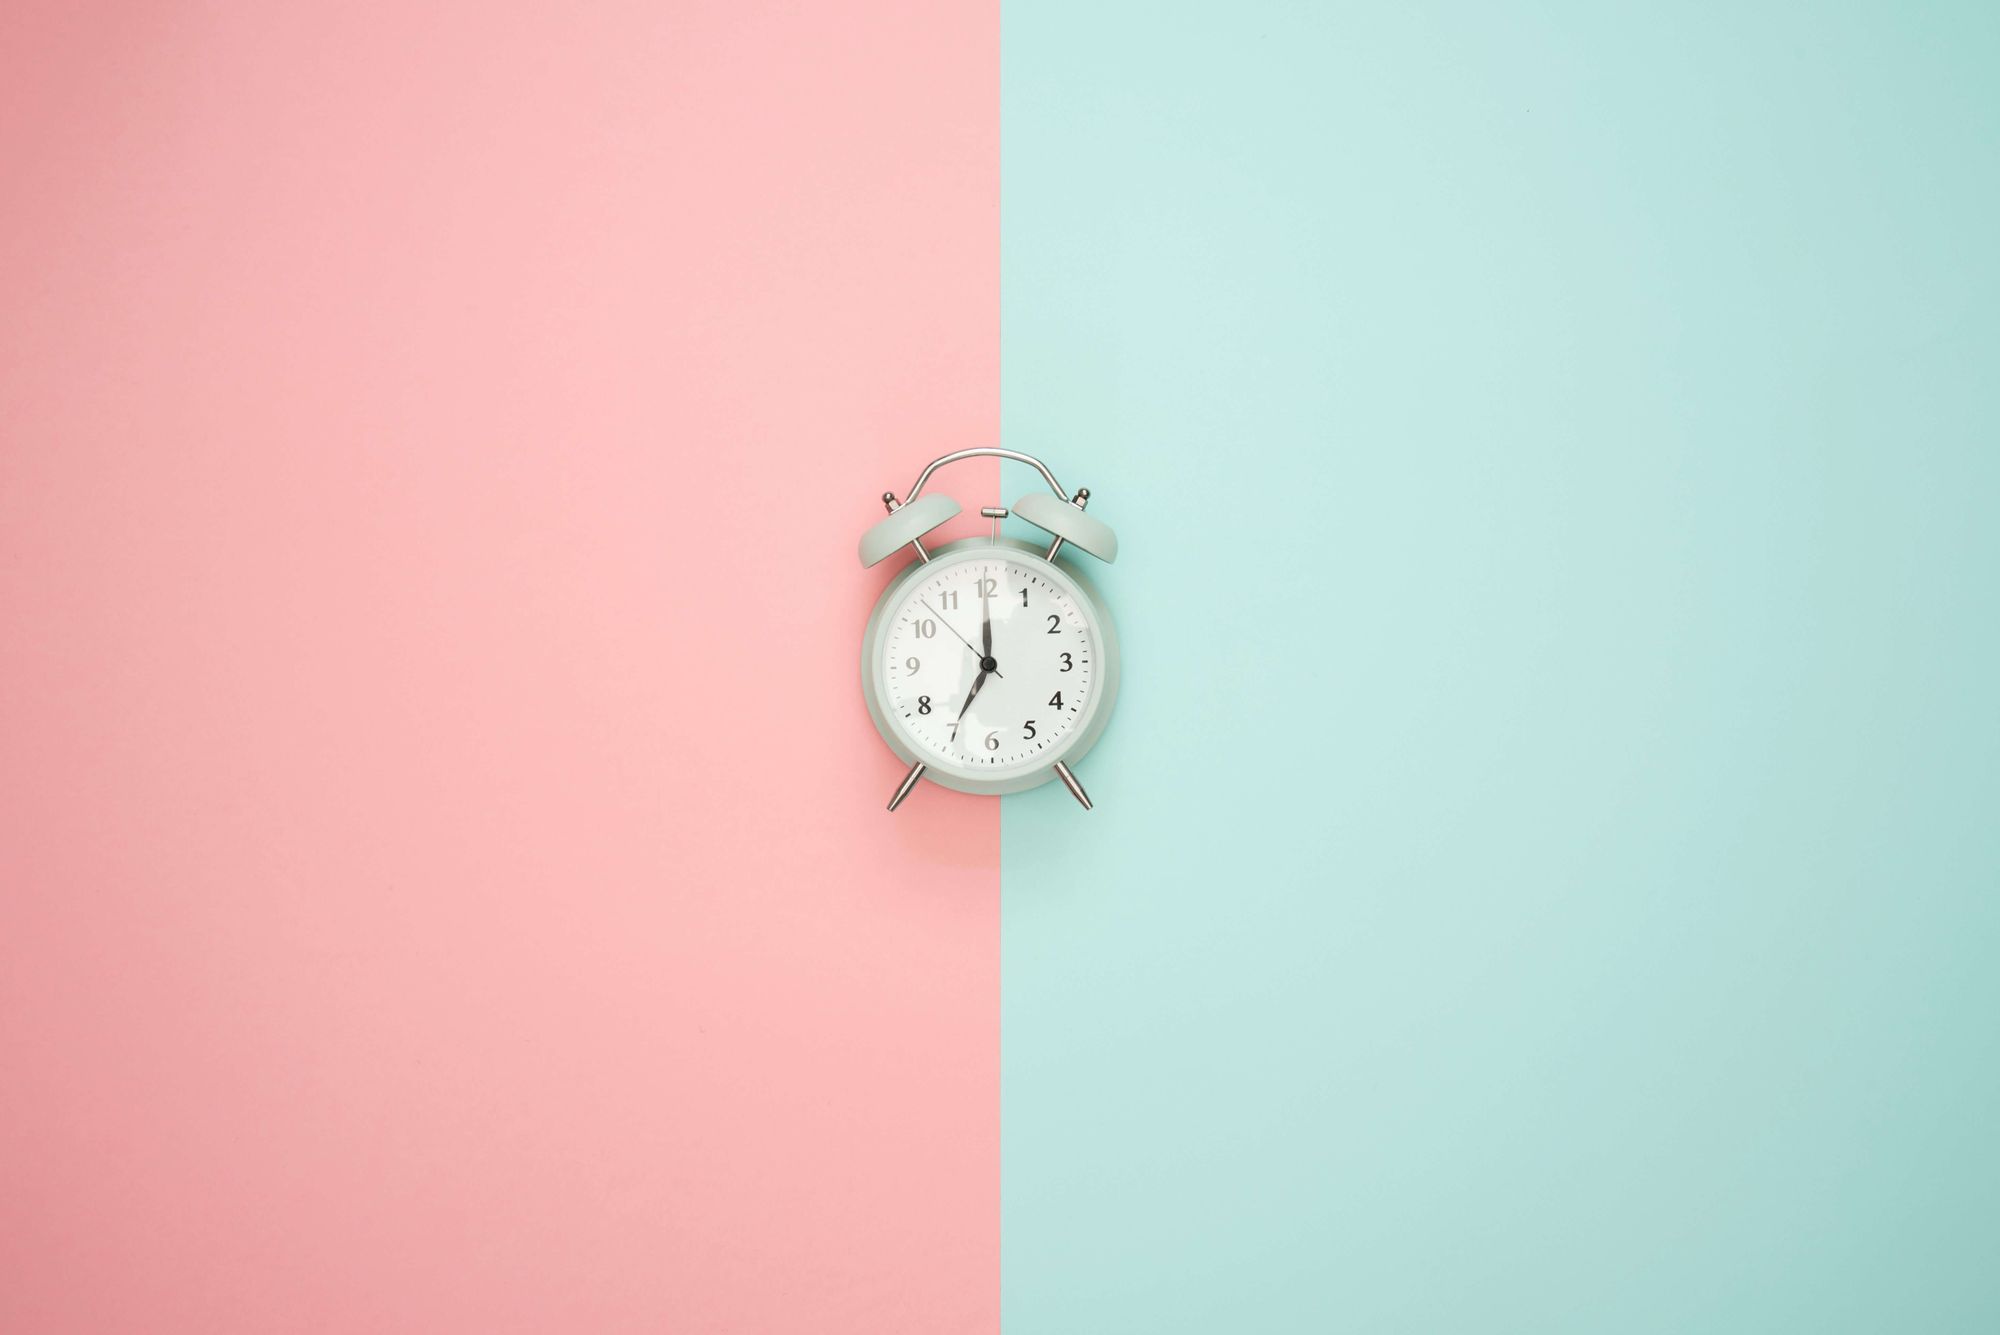 An old-fashioned alarm clock in front of a pastel pink and green background